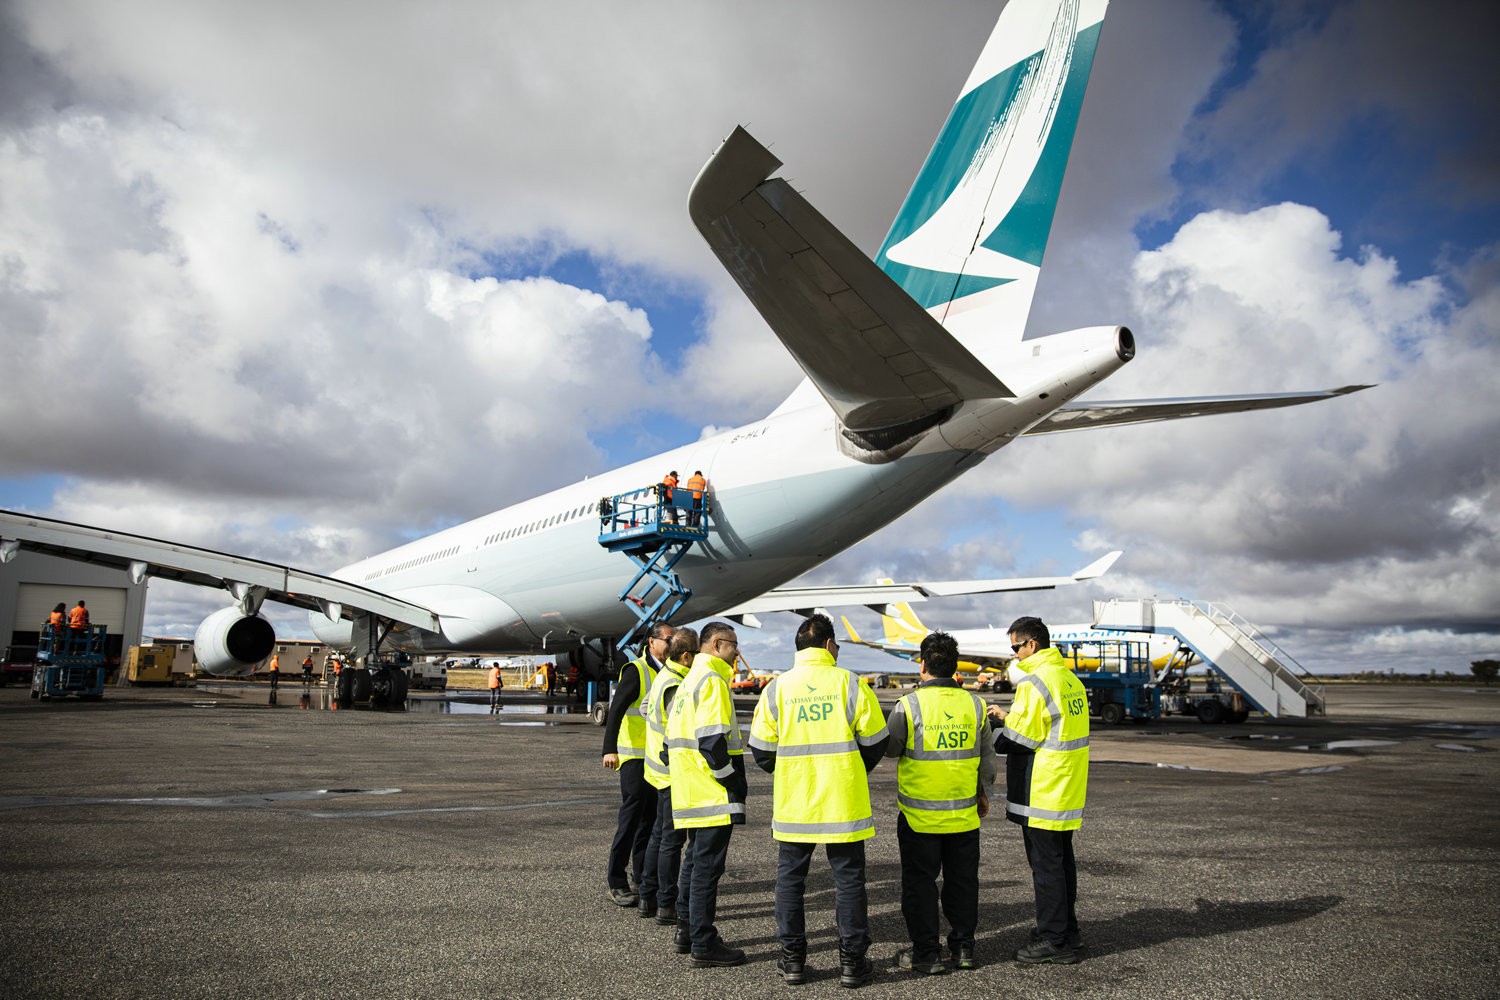 Cathay Group Completes Historic Return of Long-Term Parked Aircraft